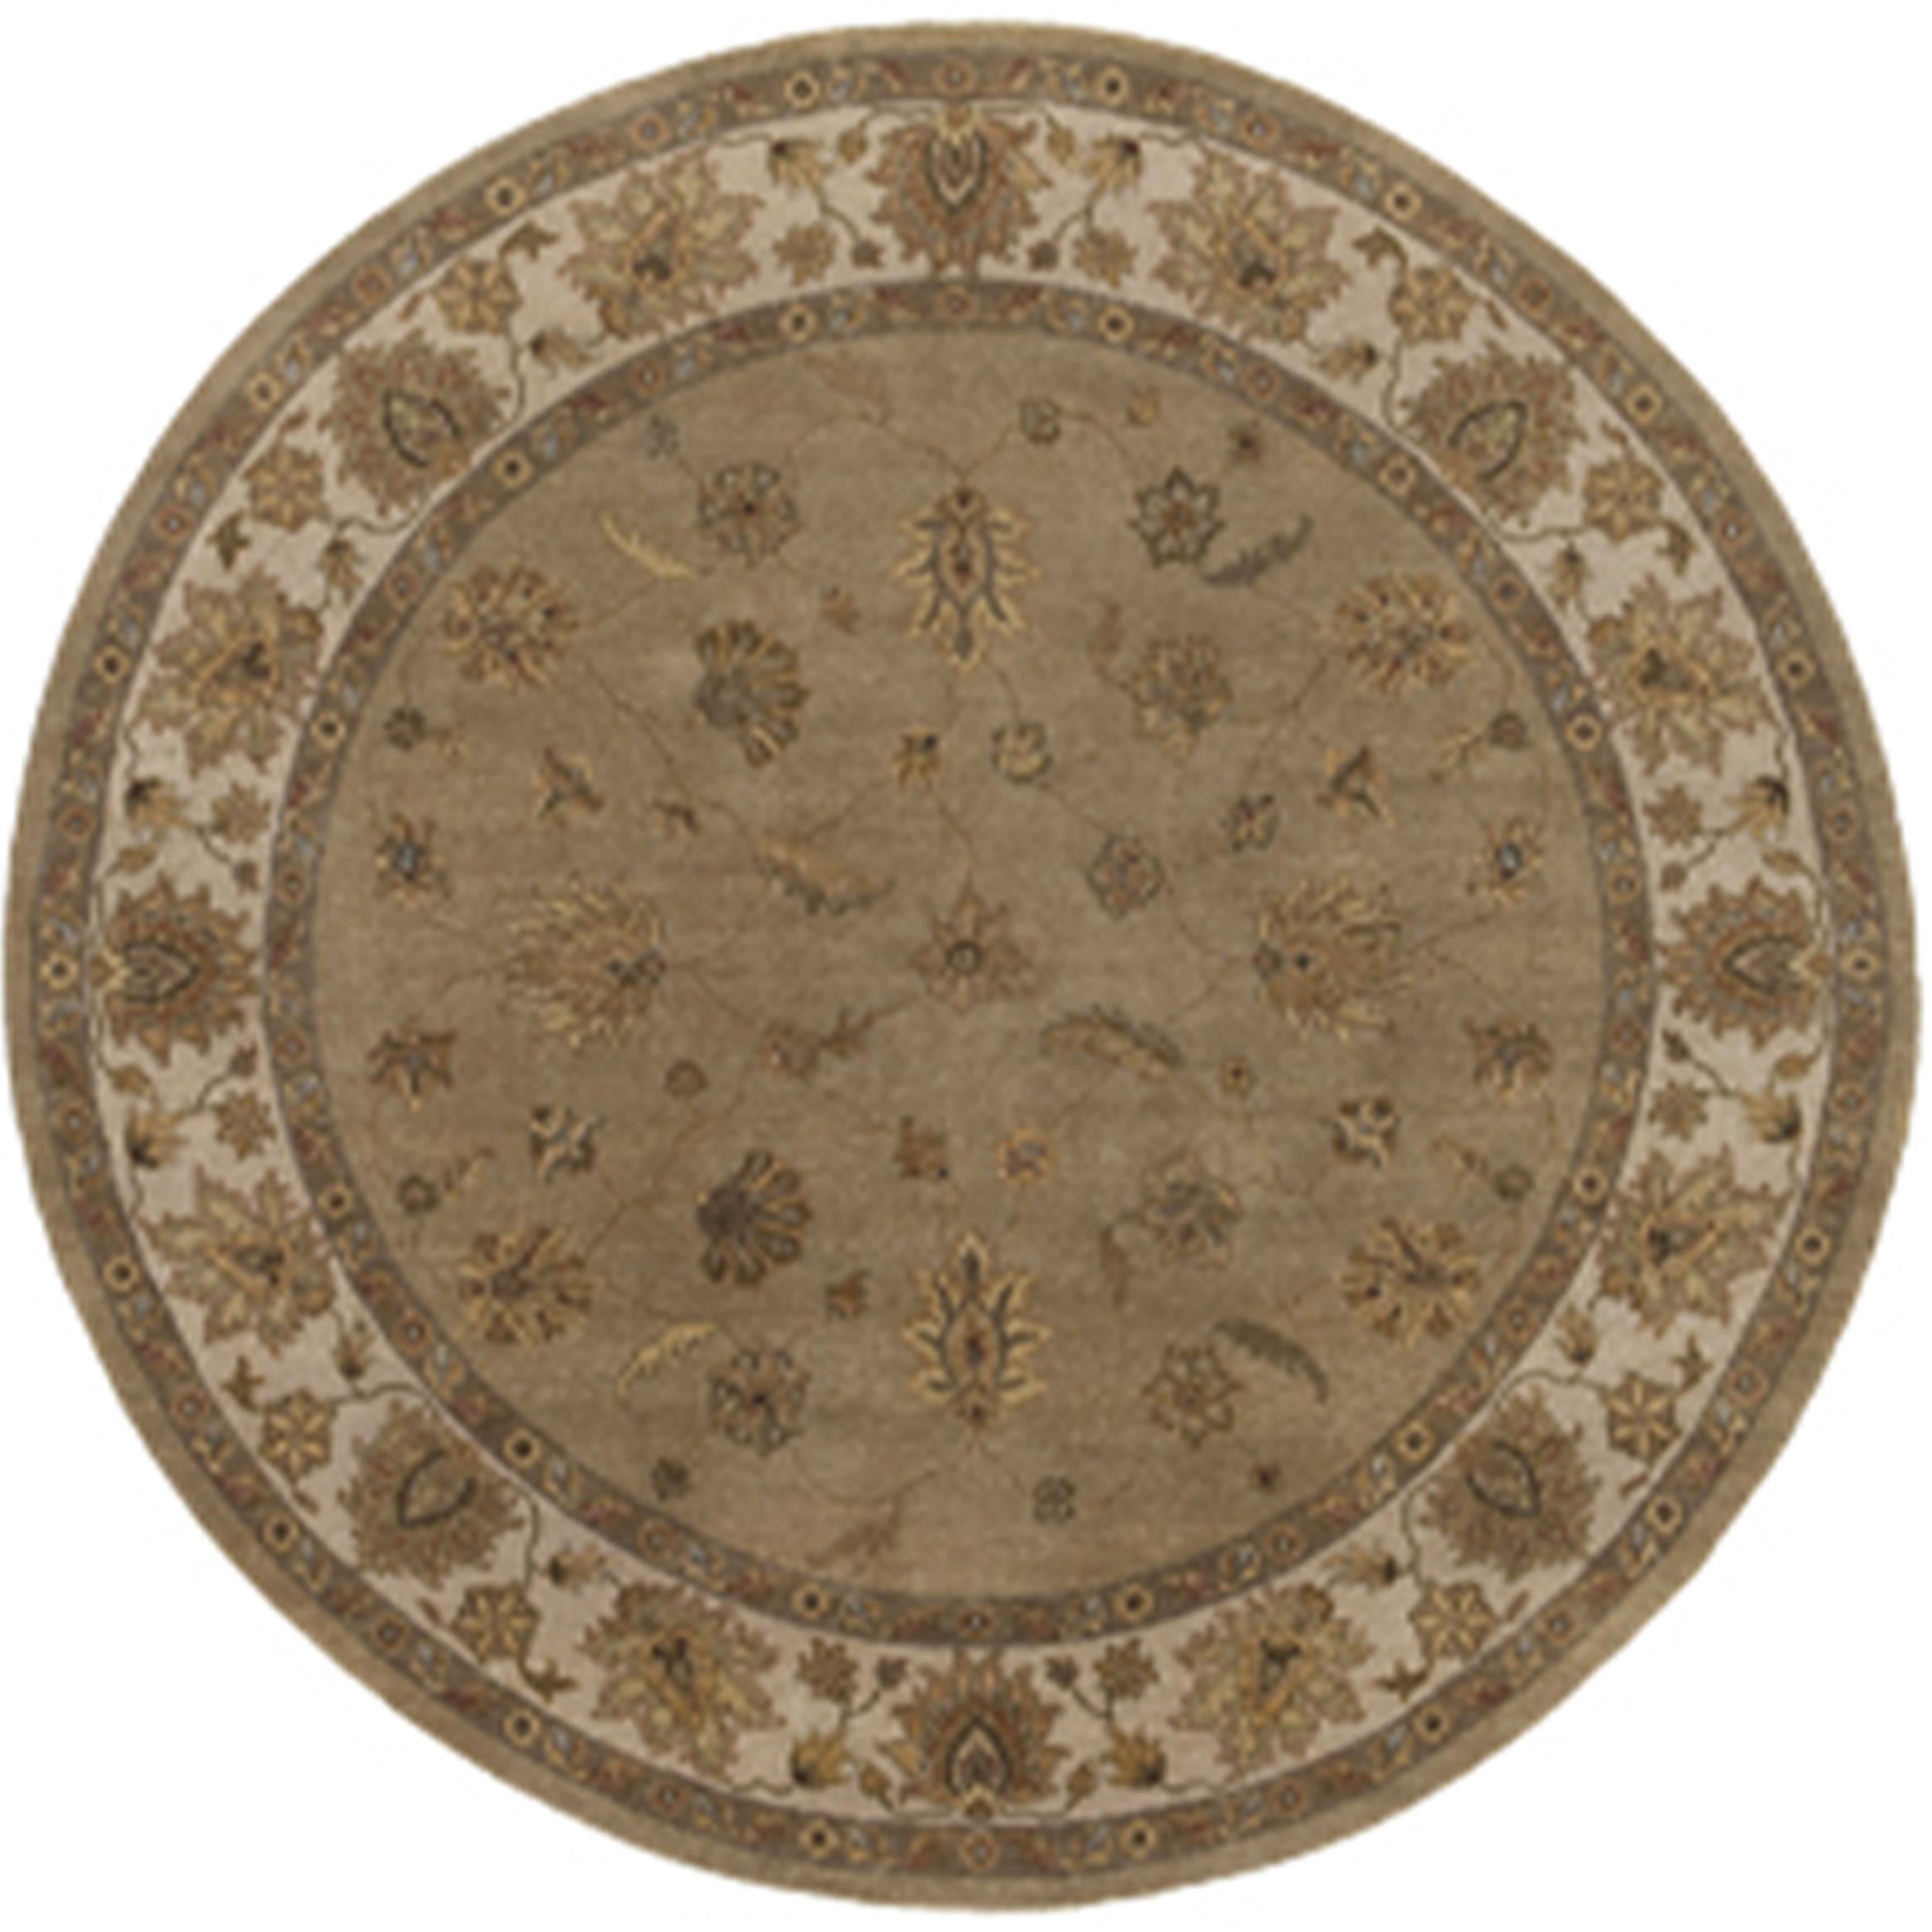 Luxury Traditional Hand-Knotted Amritsar Oushak Beige/Ivory 12X12 Round Rug In New Condition For Sale In Secaucus, NJ